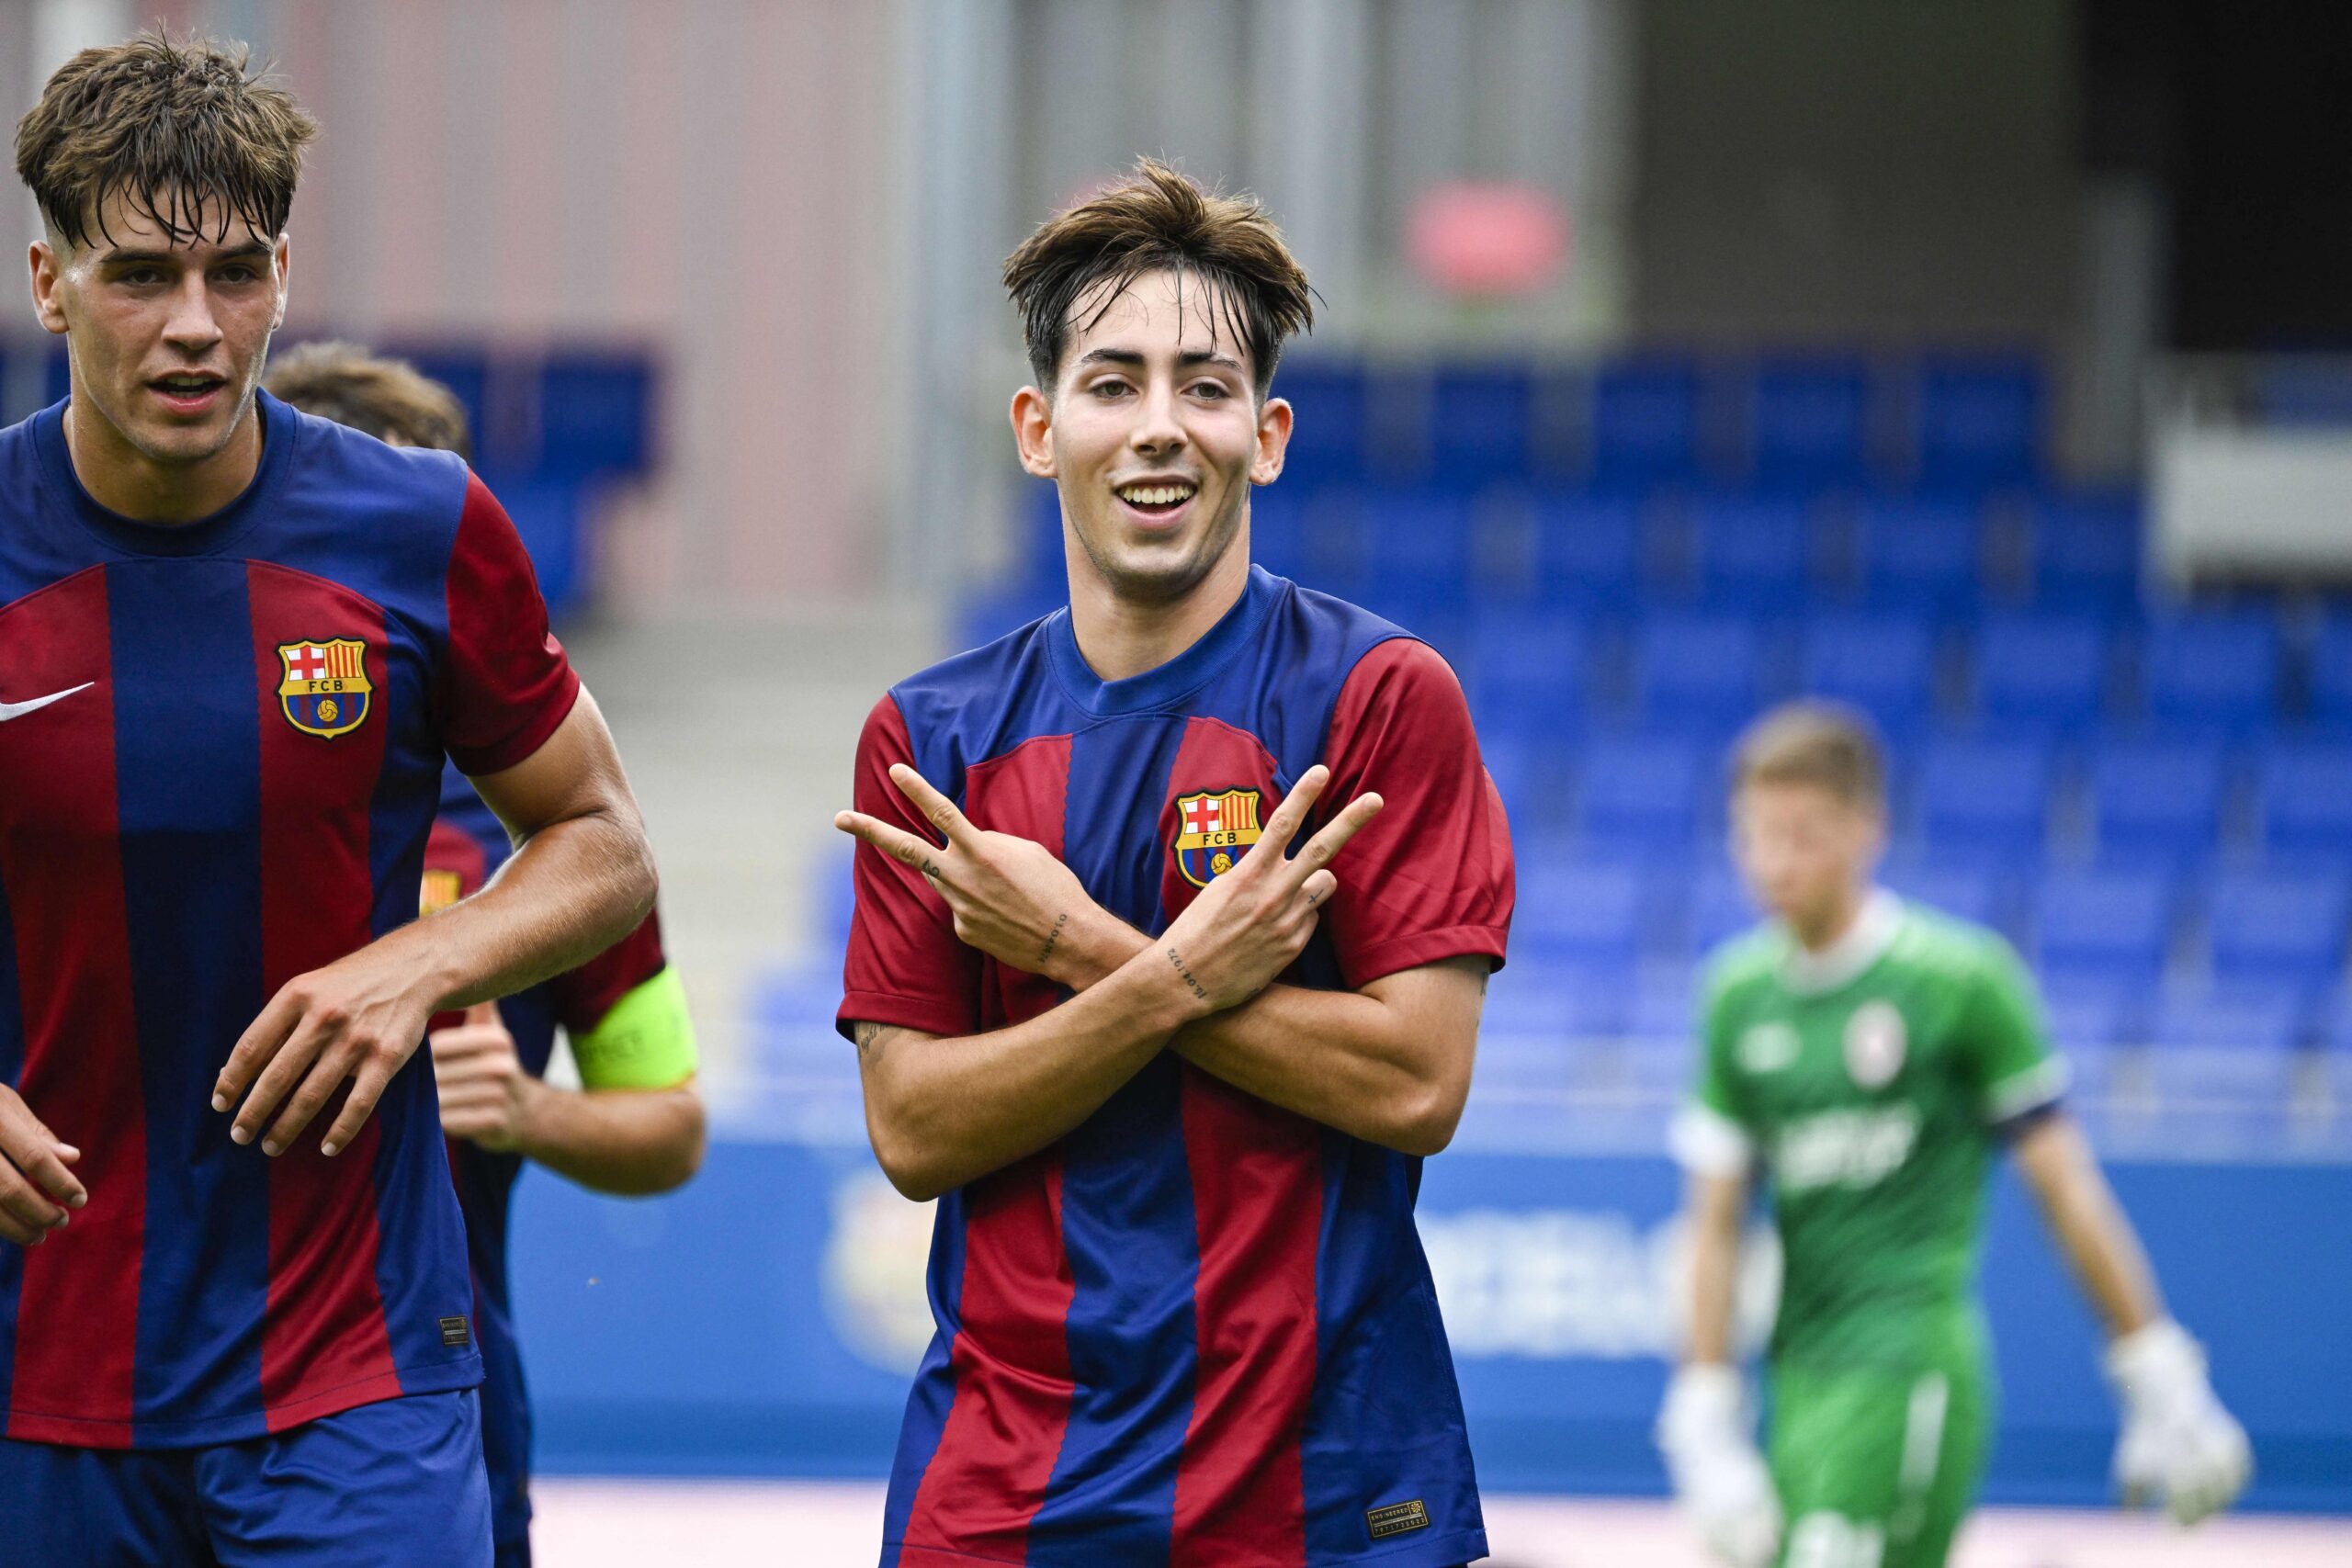 Barcelona's Daniel Dani Rodriguez celebrates after scoring during a soccer game between Spanish FC Barcelona and Belgian Royal Antwerp FC, on Tuesday 19 September 2023 in Barcelona, Spain, on day 1 of the UEFA Youth League competition.